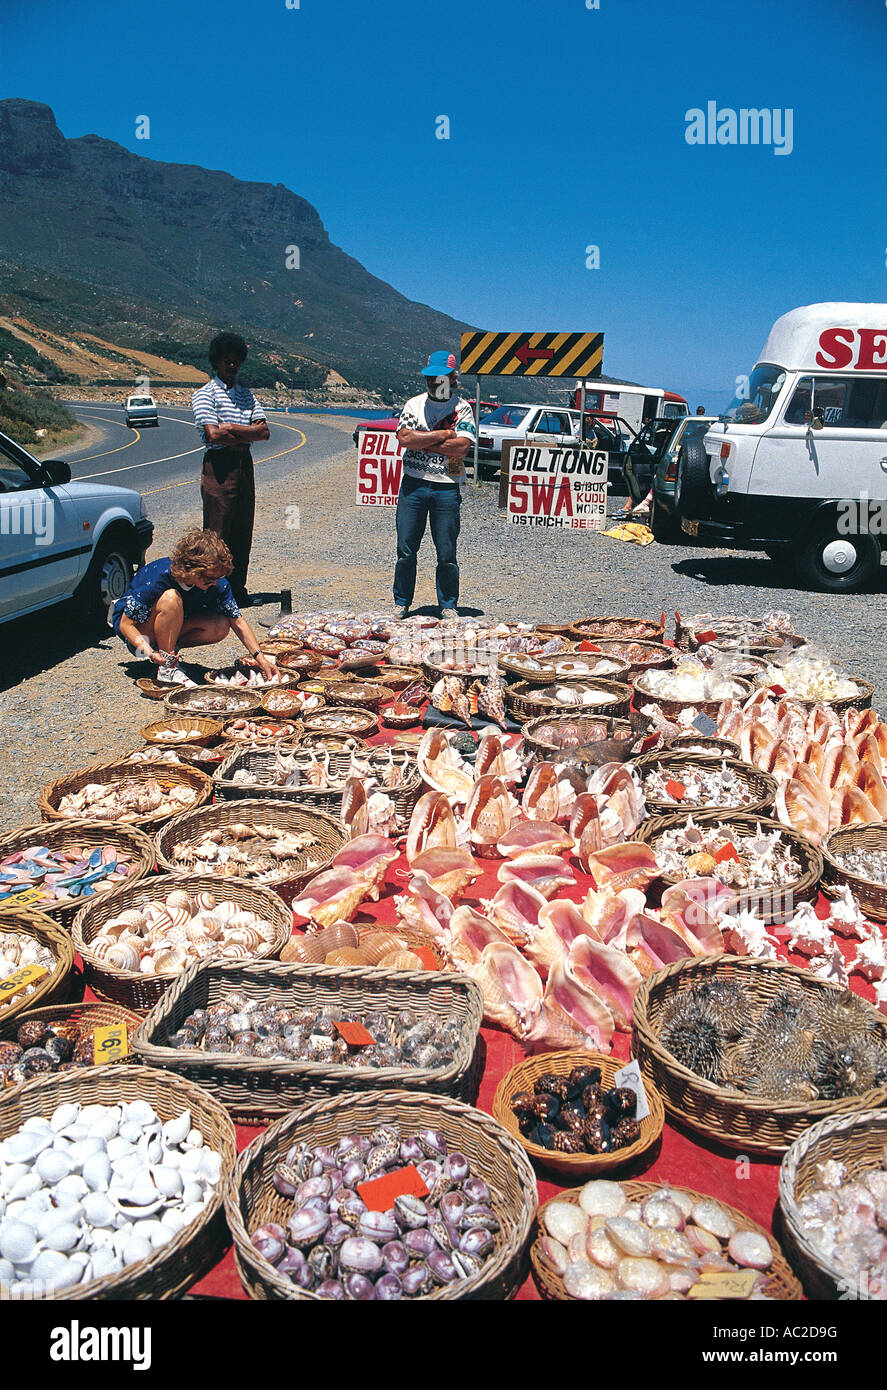 Hawkers selling sea shells biltong and other souvenirs on Cape Peninsula Cape Town South Africa Stock Photo